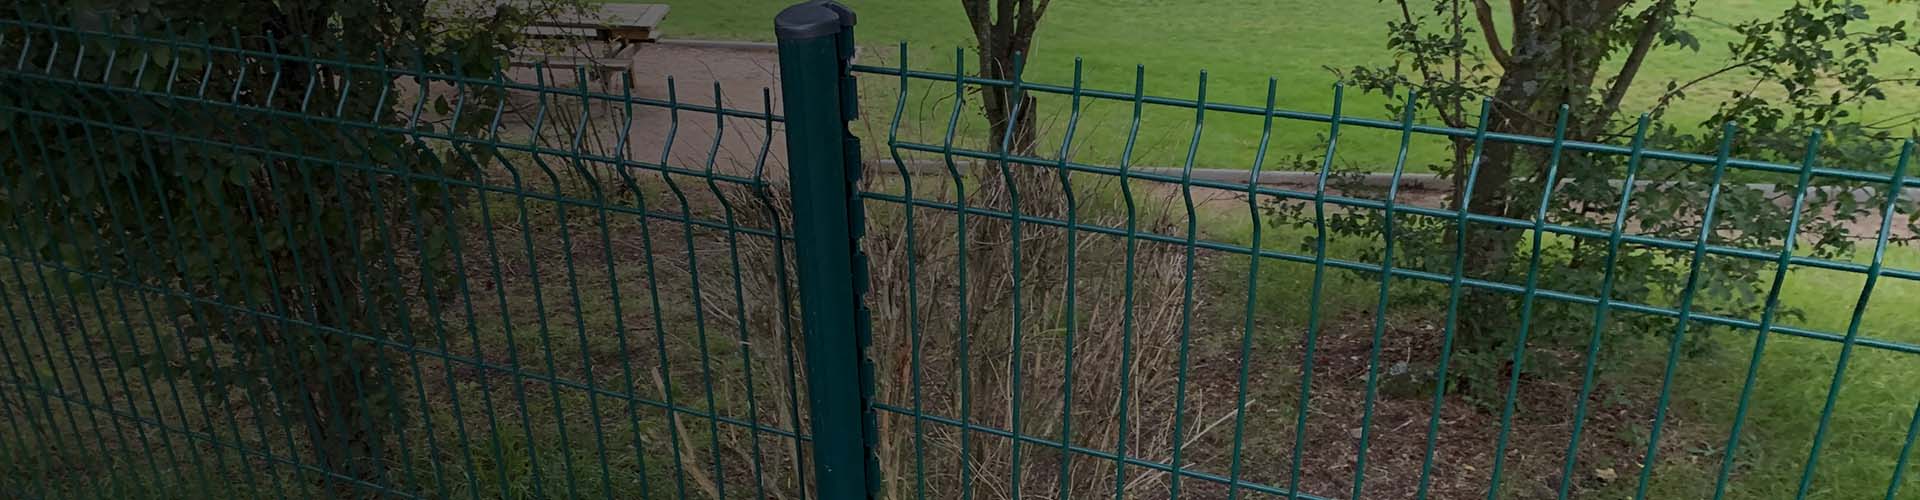 Advantages of Iron Fencing